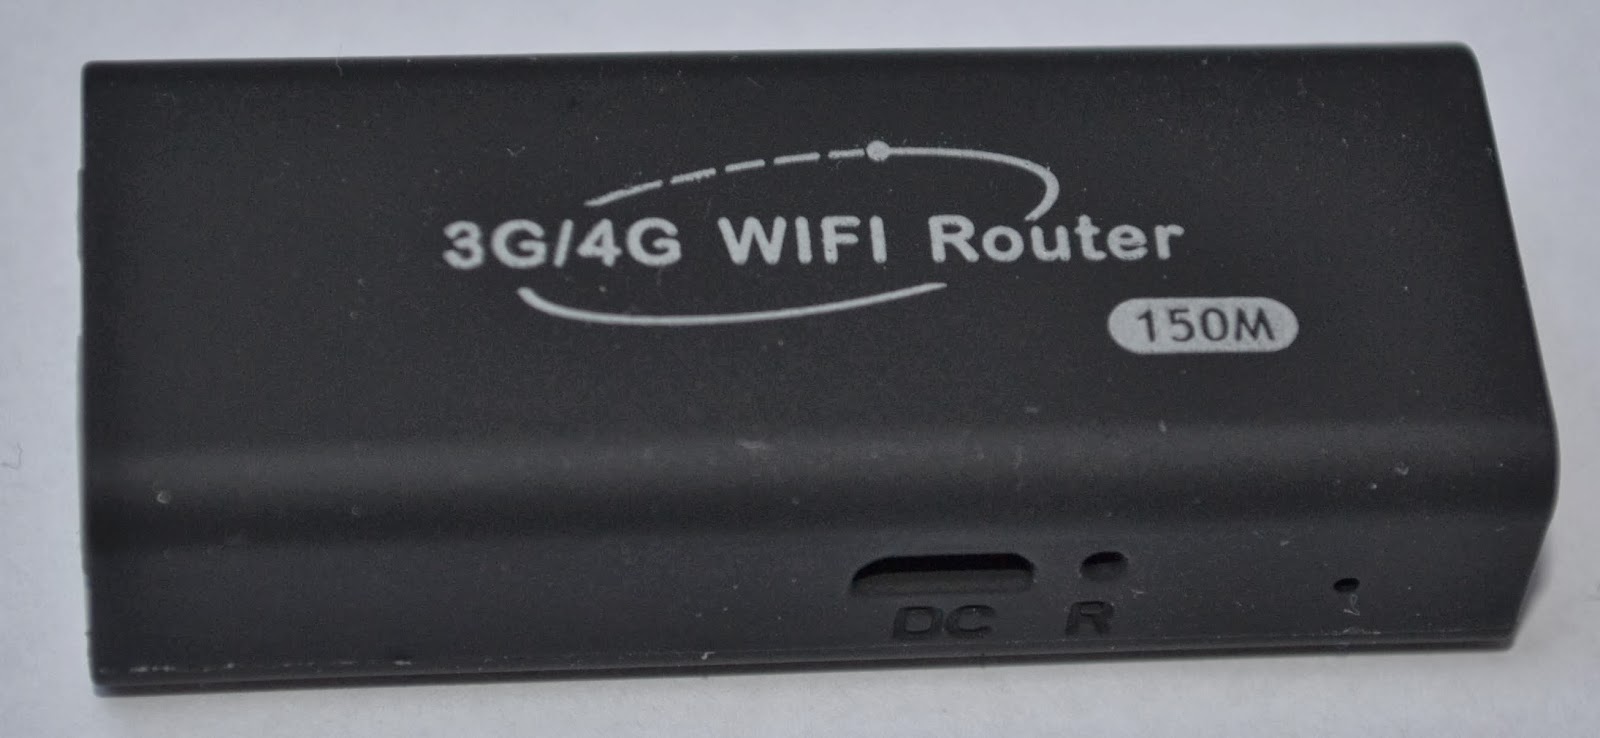 360 wifi router software